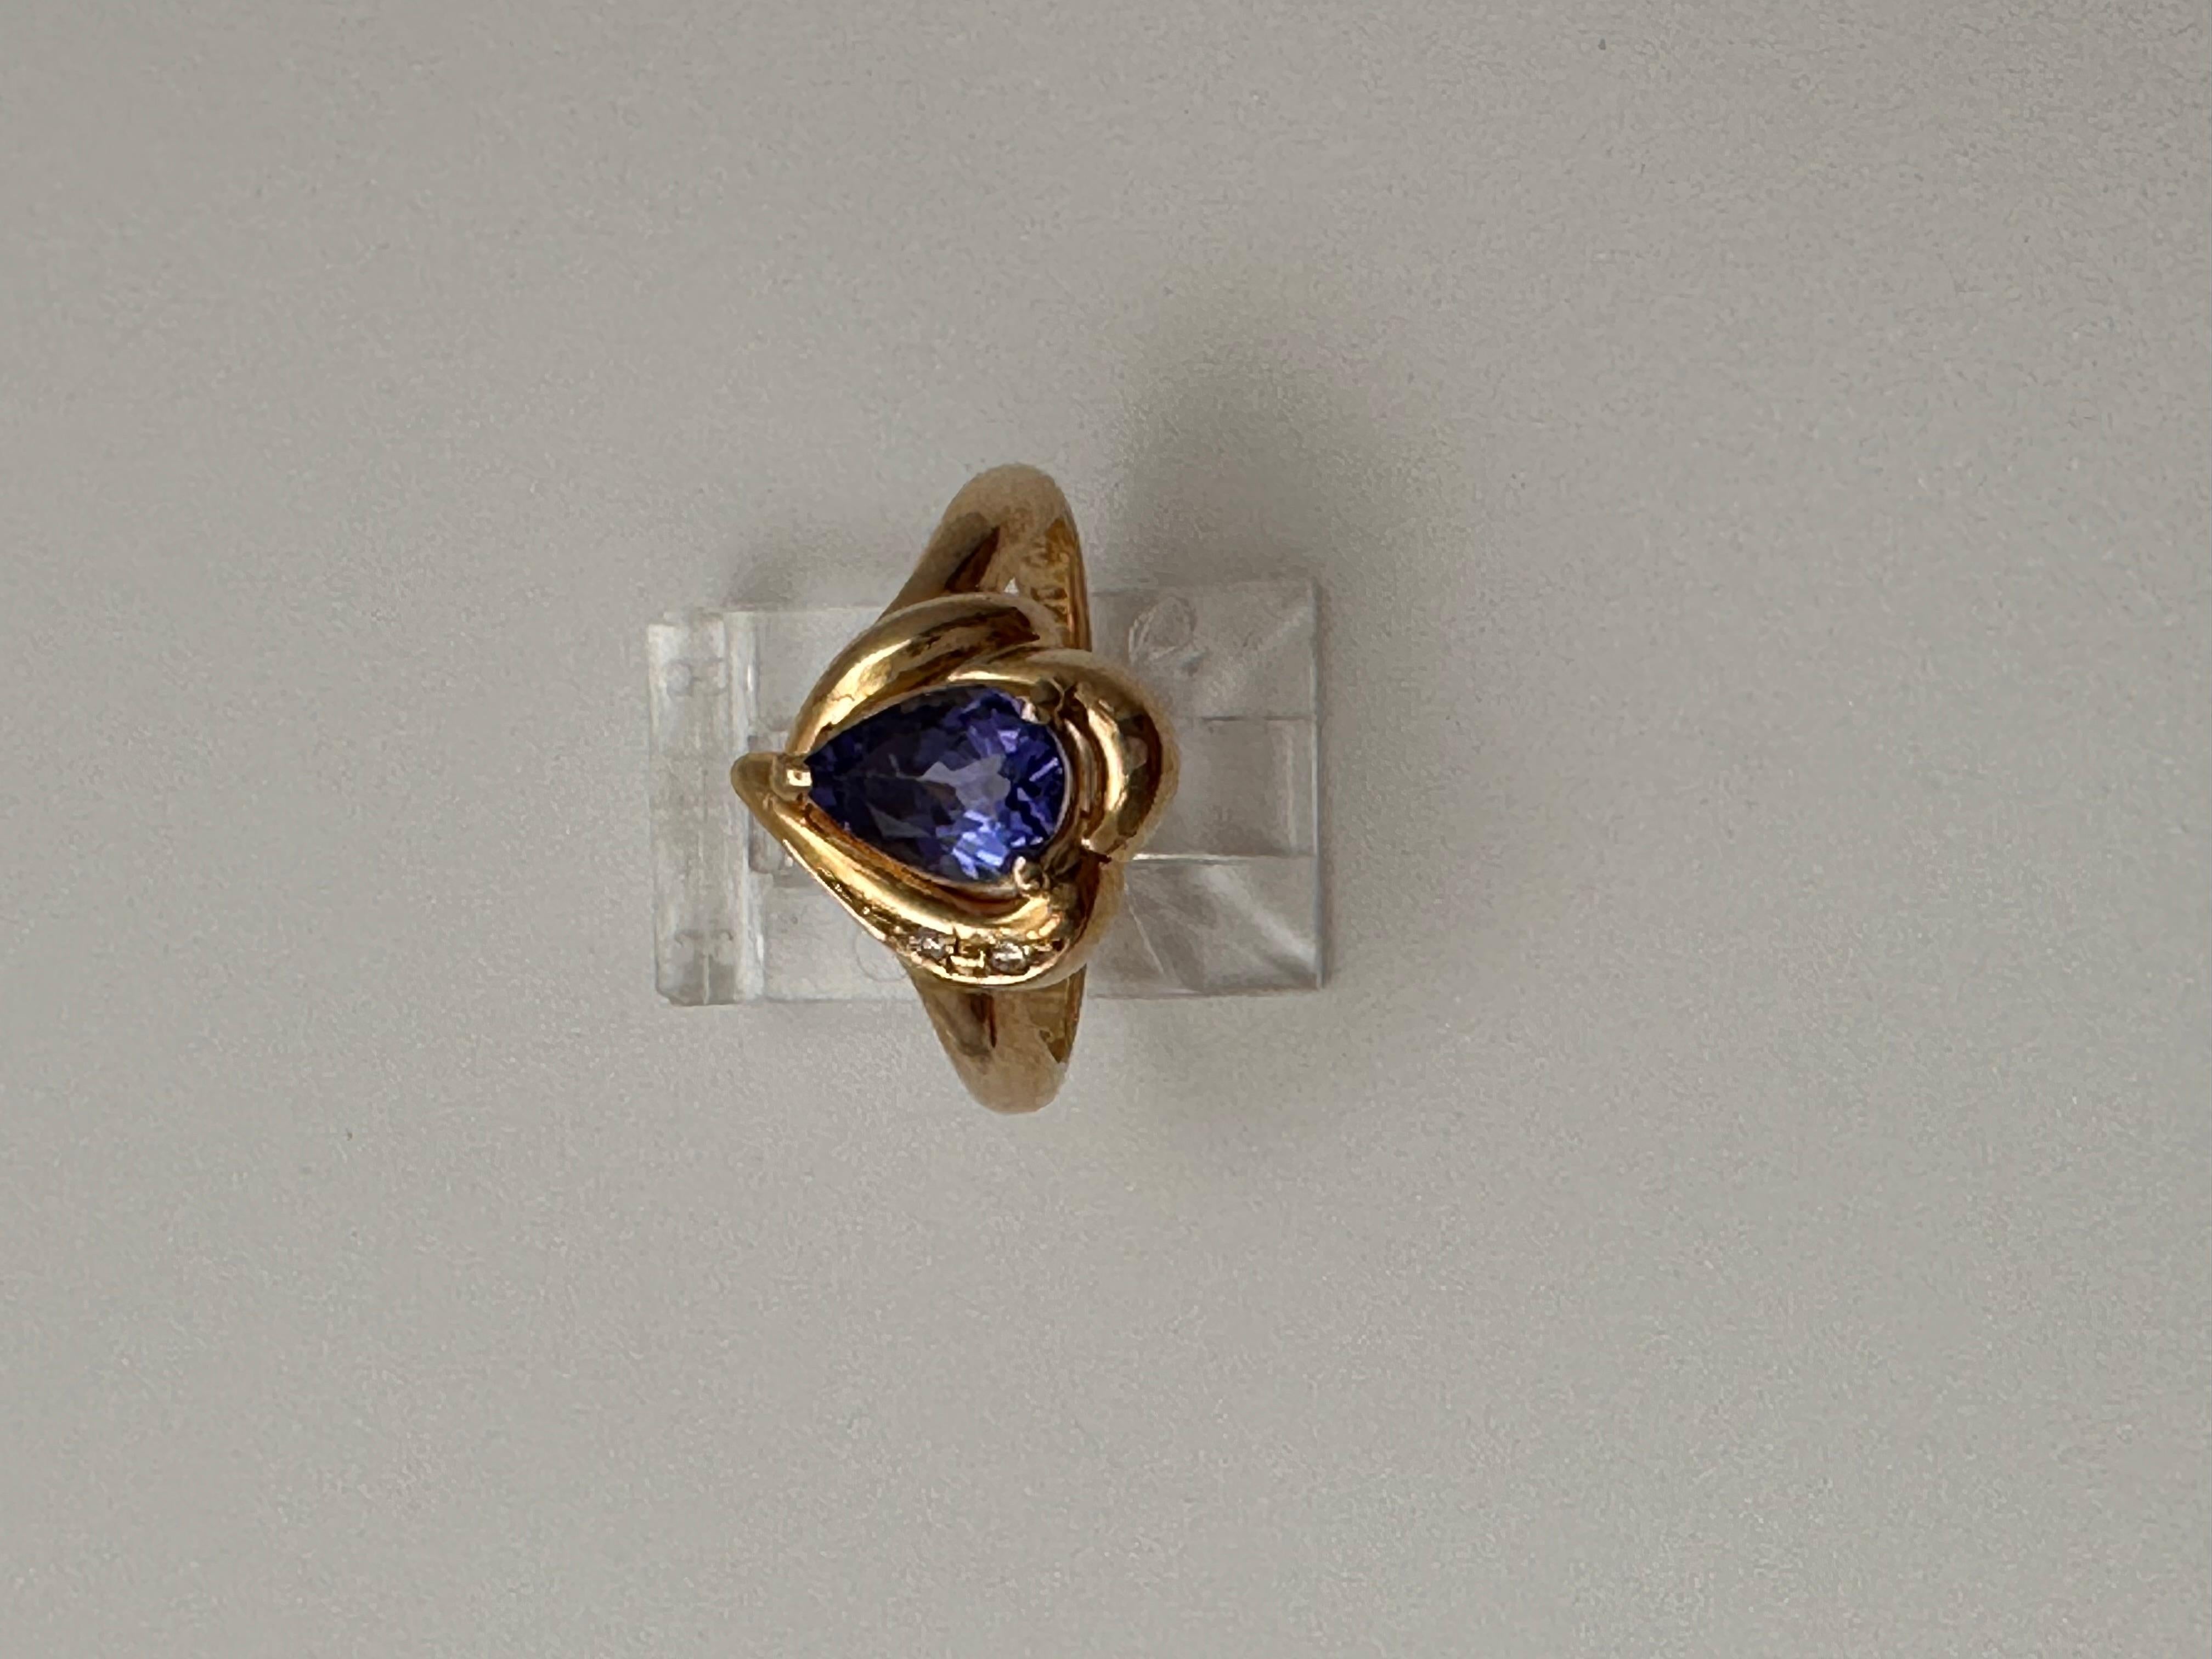 14k Yellow Gold approx. 6mm x 8mm Pear Tanzanite with 2 Side Diamonds 
Ring Size 6 1/2

Tanzanite 

Tanzanite changes colors when it is viewed from different directions. This shifting of colors has been said to facilitate raising consciousness. It